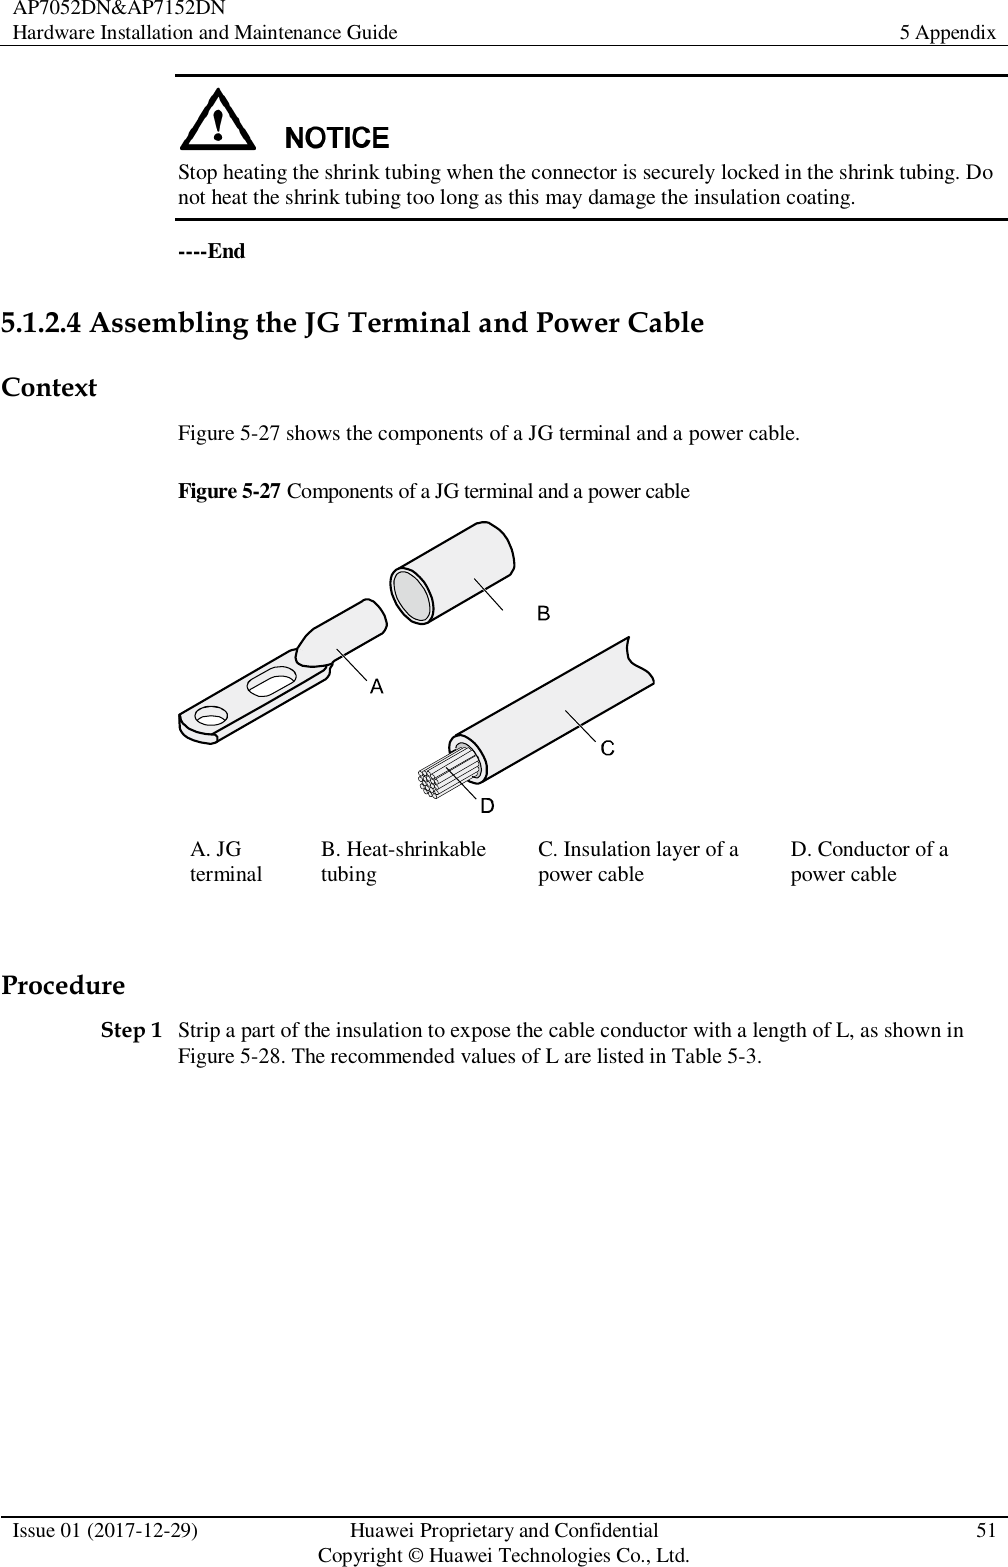 AP7052DN&amp;AP7152DN Hardware Installation and Maintenance Guide 5 Appendix  Issue 01 (2017-12-29) Huawei Proprietary and Confidential                                     Copyright © Huawei Technologies Co., Ltd. 51   Stop heating the shrink tubing when the connector is securely locked in the shrink tubing. Do not heat the shrink tubing too long as this may damage the insulation coating. ----End 5.1.2.4 Assembling the JG Terminal and Power Cable Context Figure 5-27 shows the components of a JG terminal and a power cable. Figure 5-27 Components of a JG terminal and a power cable  A. JG terminal B. Heat-shrinkable tubing C. Insulation layer of a power cable D. Conductor of a power cable  Procedure Step 1 Strip a part of the insulation to expose the cable conductor with a length of L, as shown in Figure 5-28. The recommended values of L are listed in Table 5-3.  